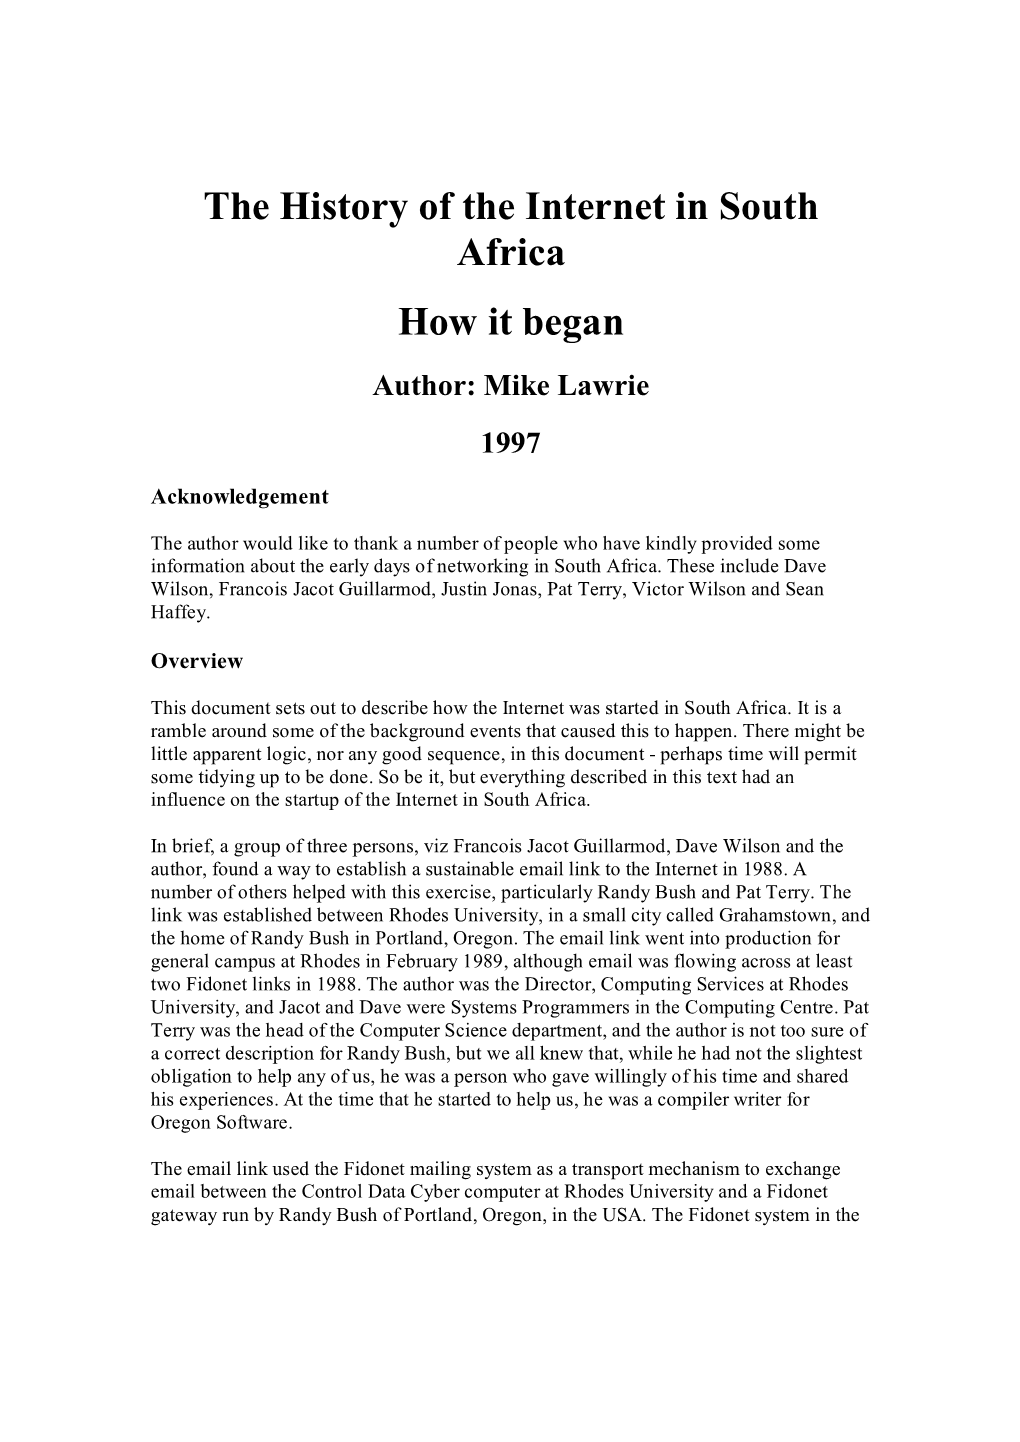 The History of the Internet in South Africa How It Began Author: Mike Lawrie 1997